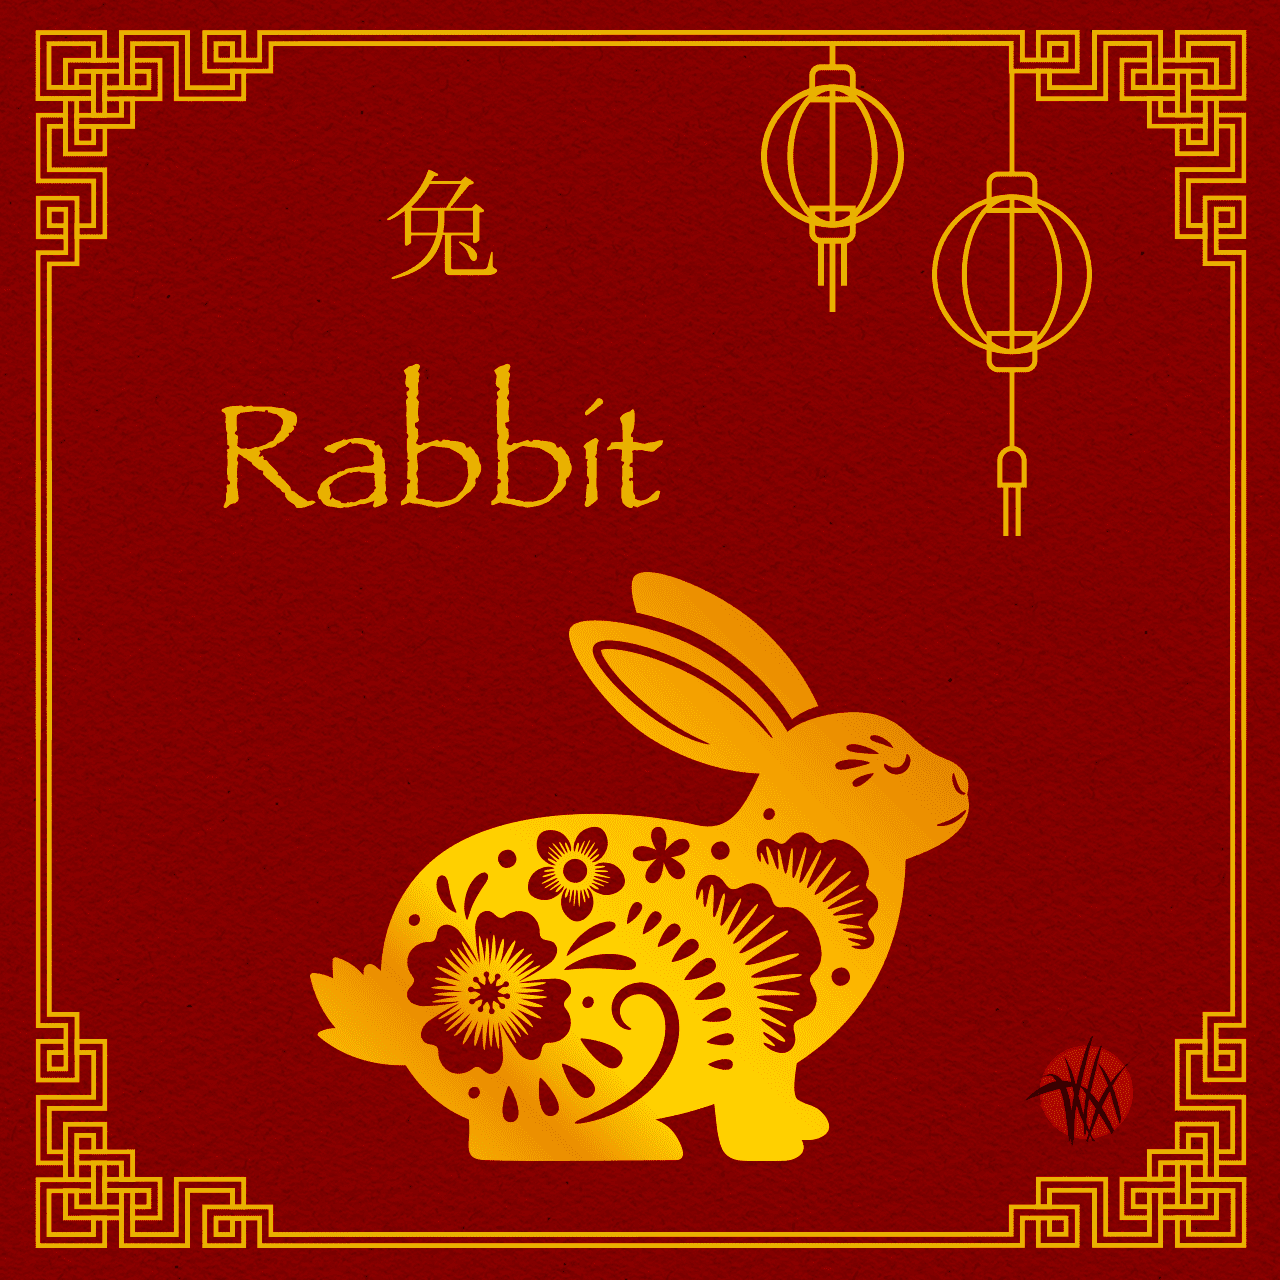 Zodiac animal: rabbit. Red background with gold drawing of rabbit